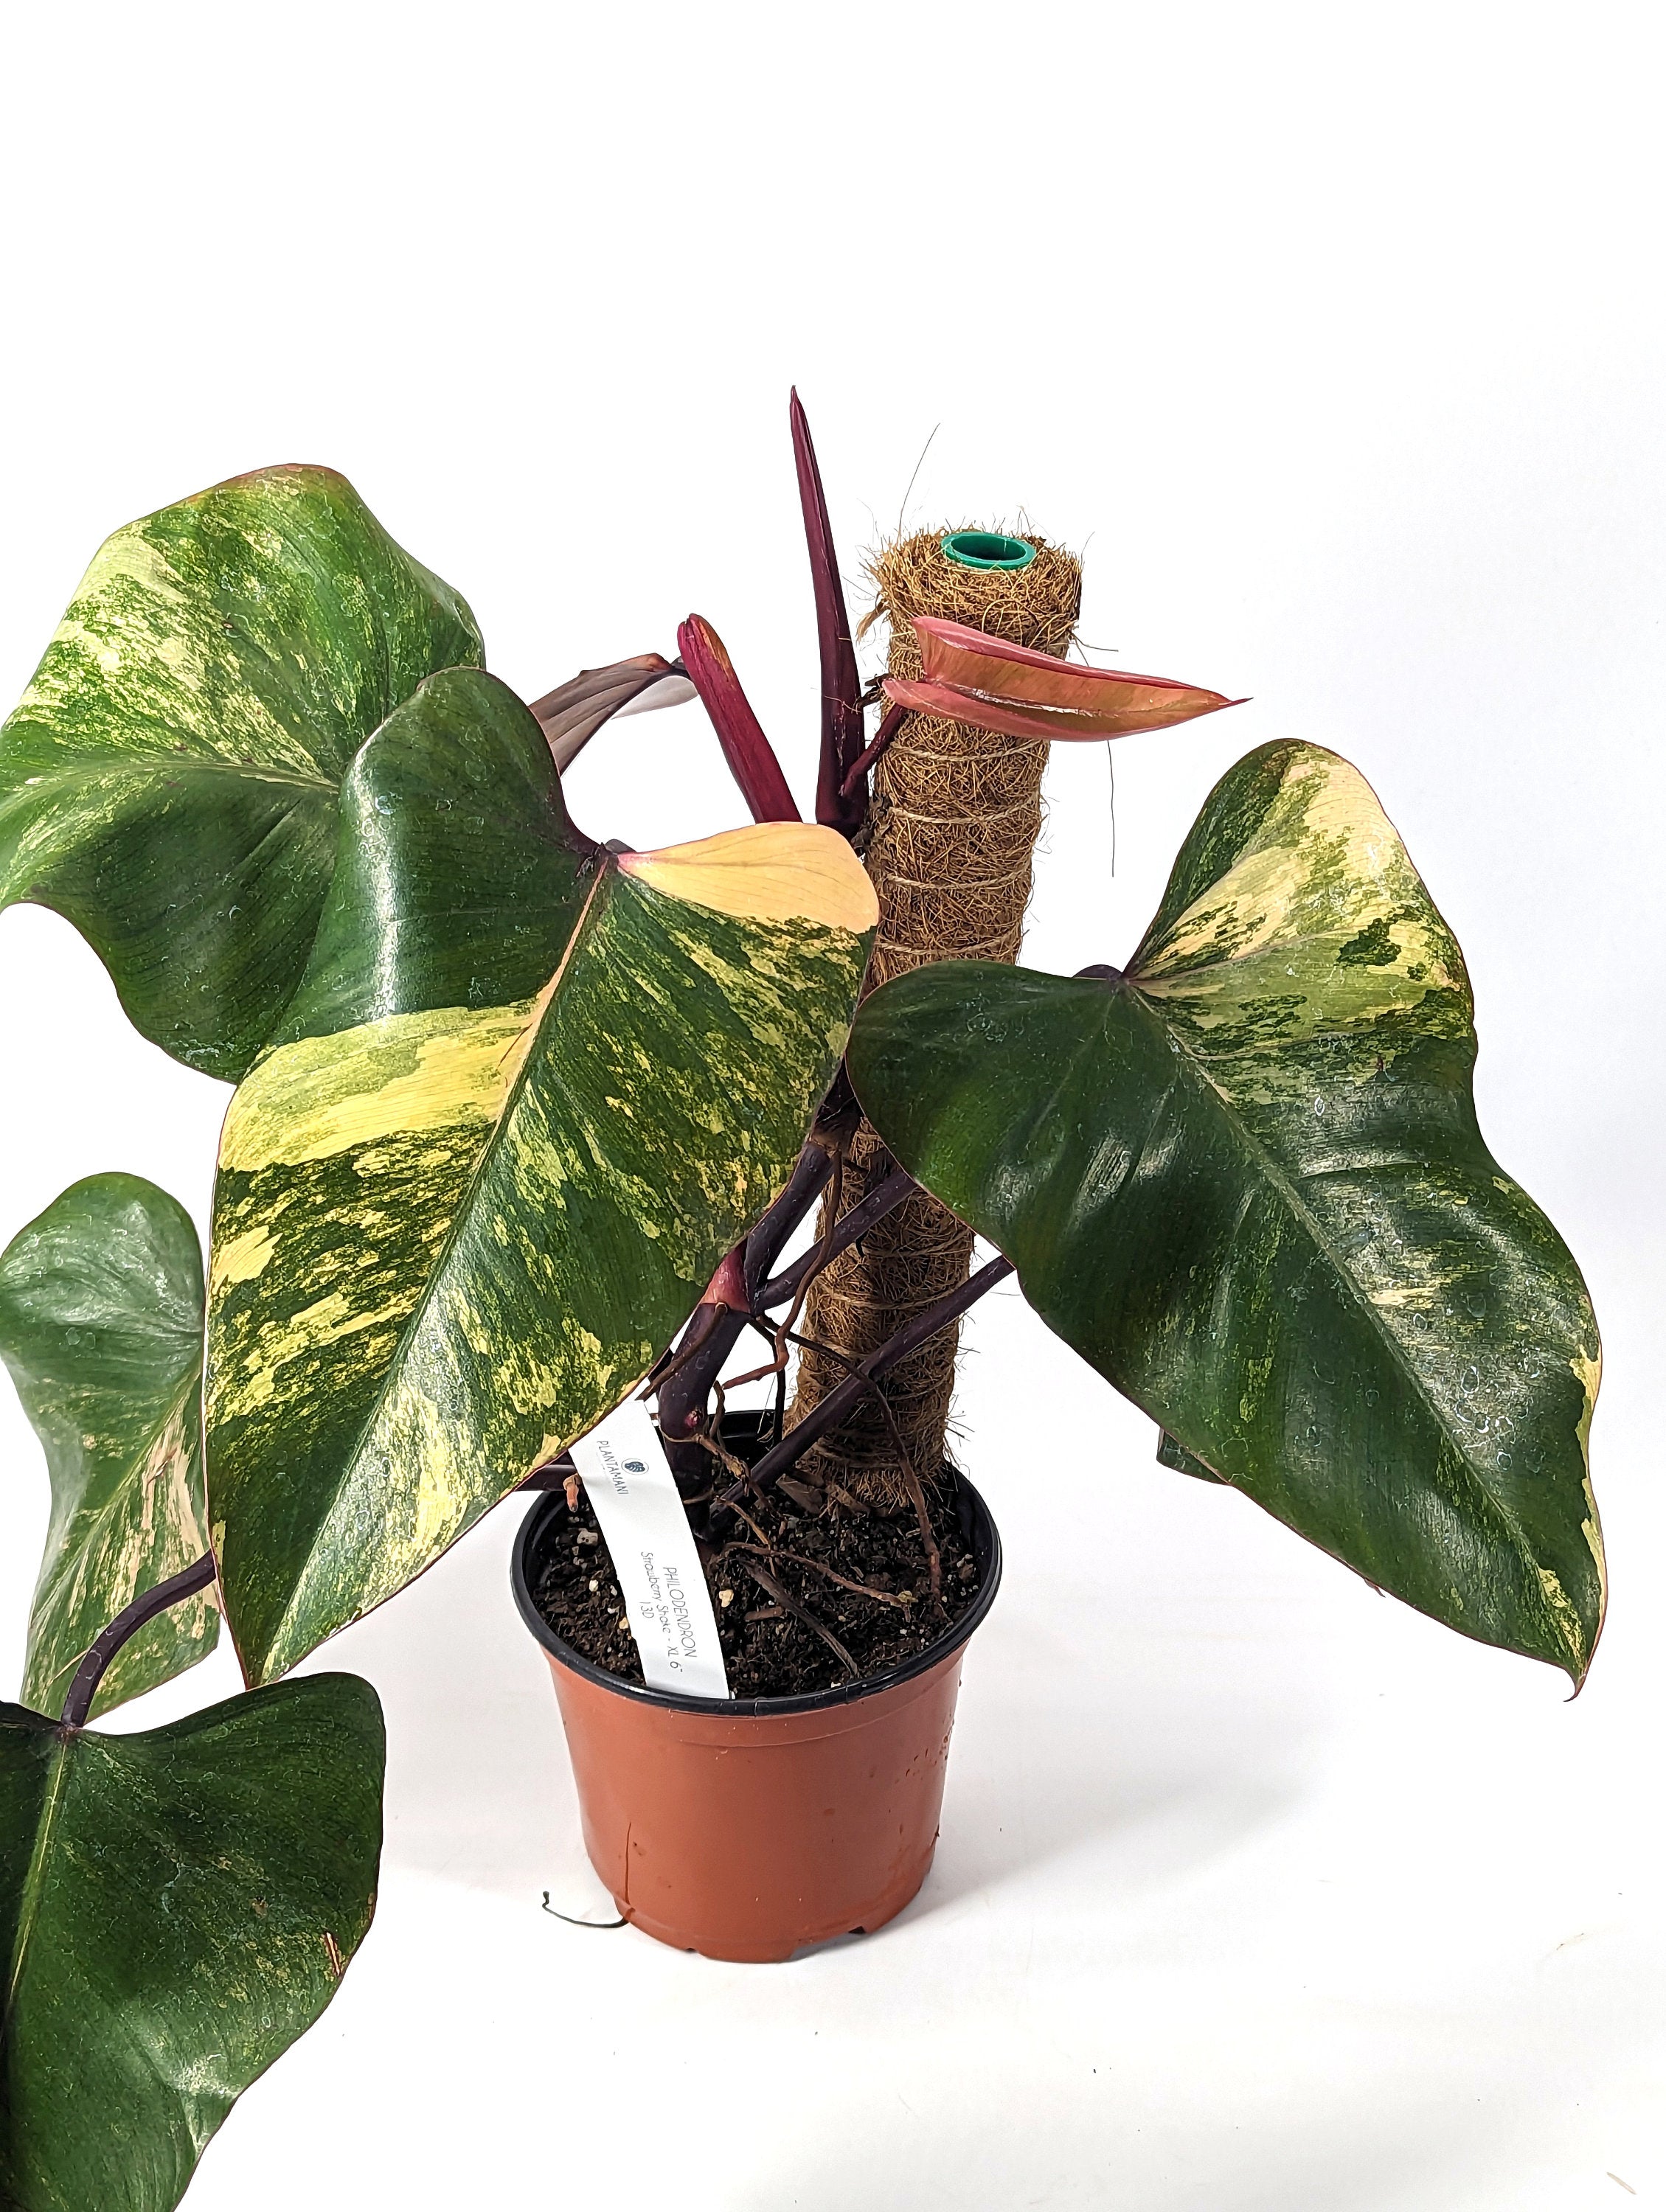 Philodendron Strawberry Shake High Color 7+ Leaves 6 inch Pot with Coco Pole - Exact Plant Pictured One Of a Kind Amazing Color